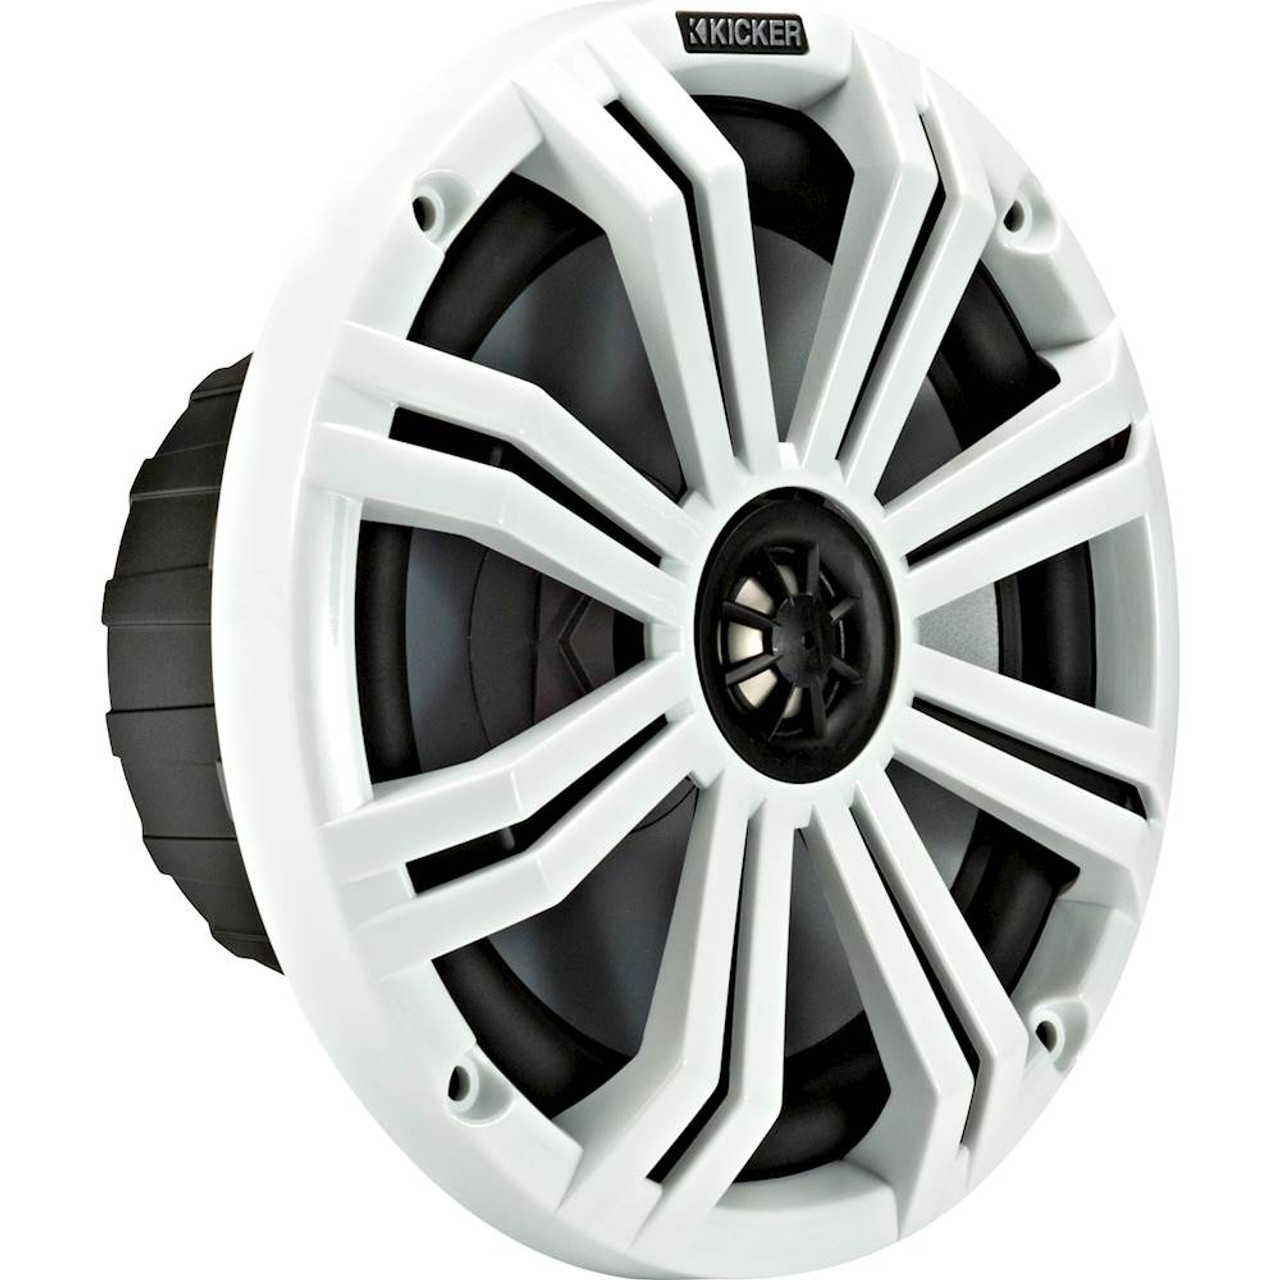 KICKER - KM Series LED 8" 2-Way Car Speakers with Polypropylene Cones (Pair) - Charcoal And White